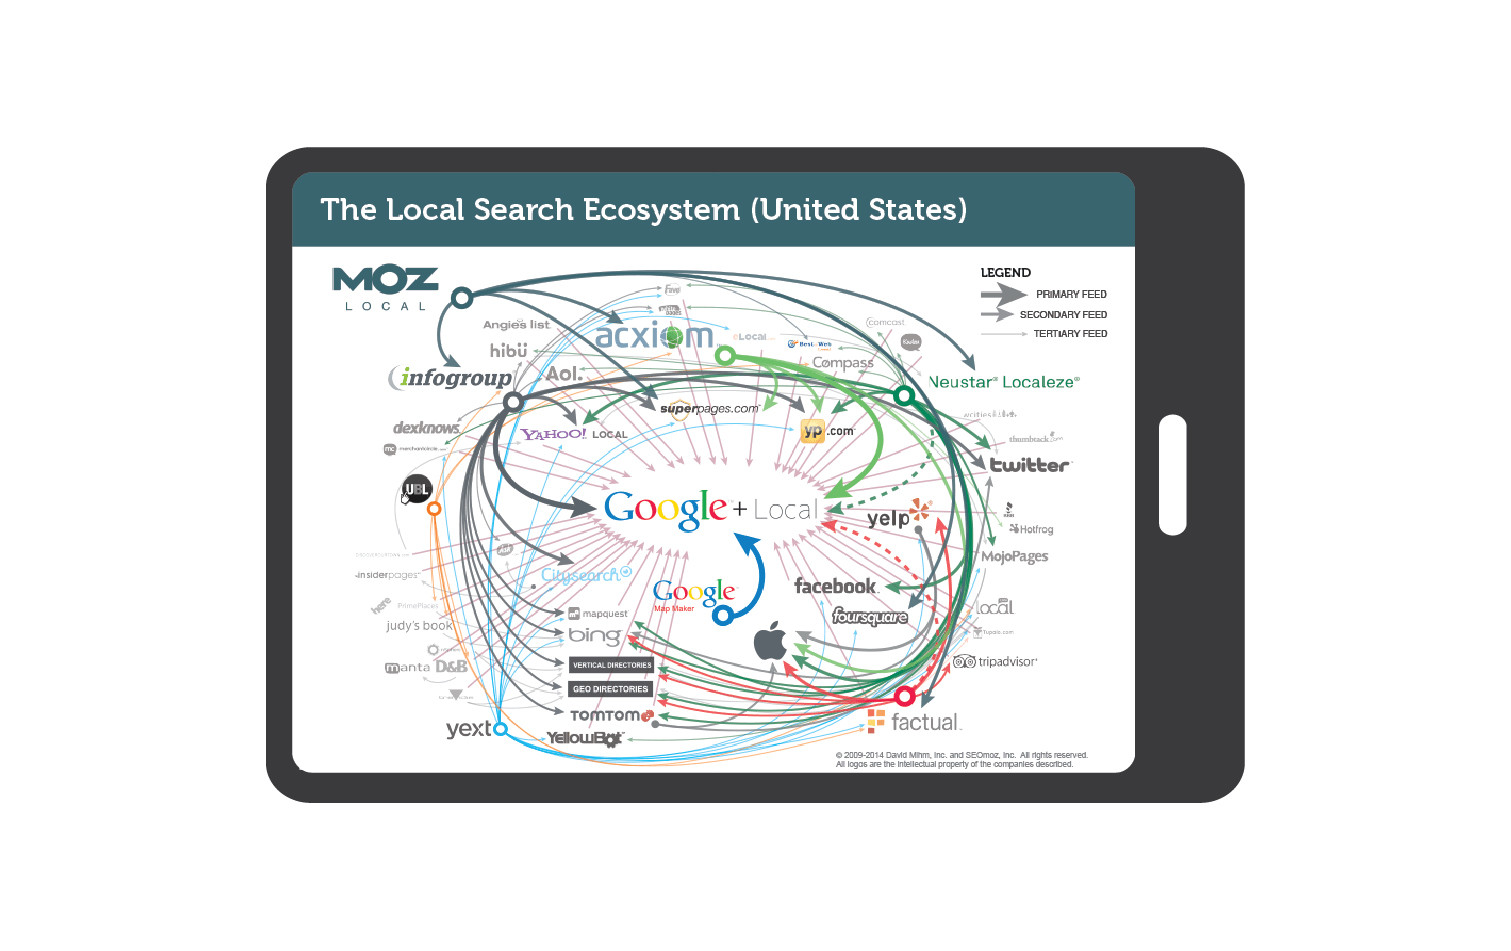 The Local Search Ecosystem USA by Moz